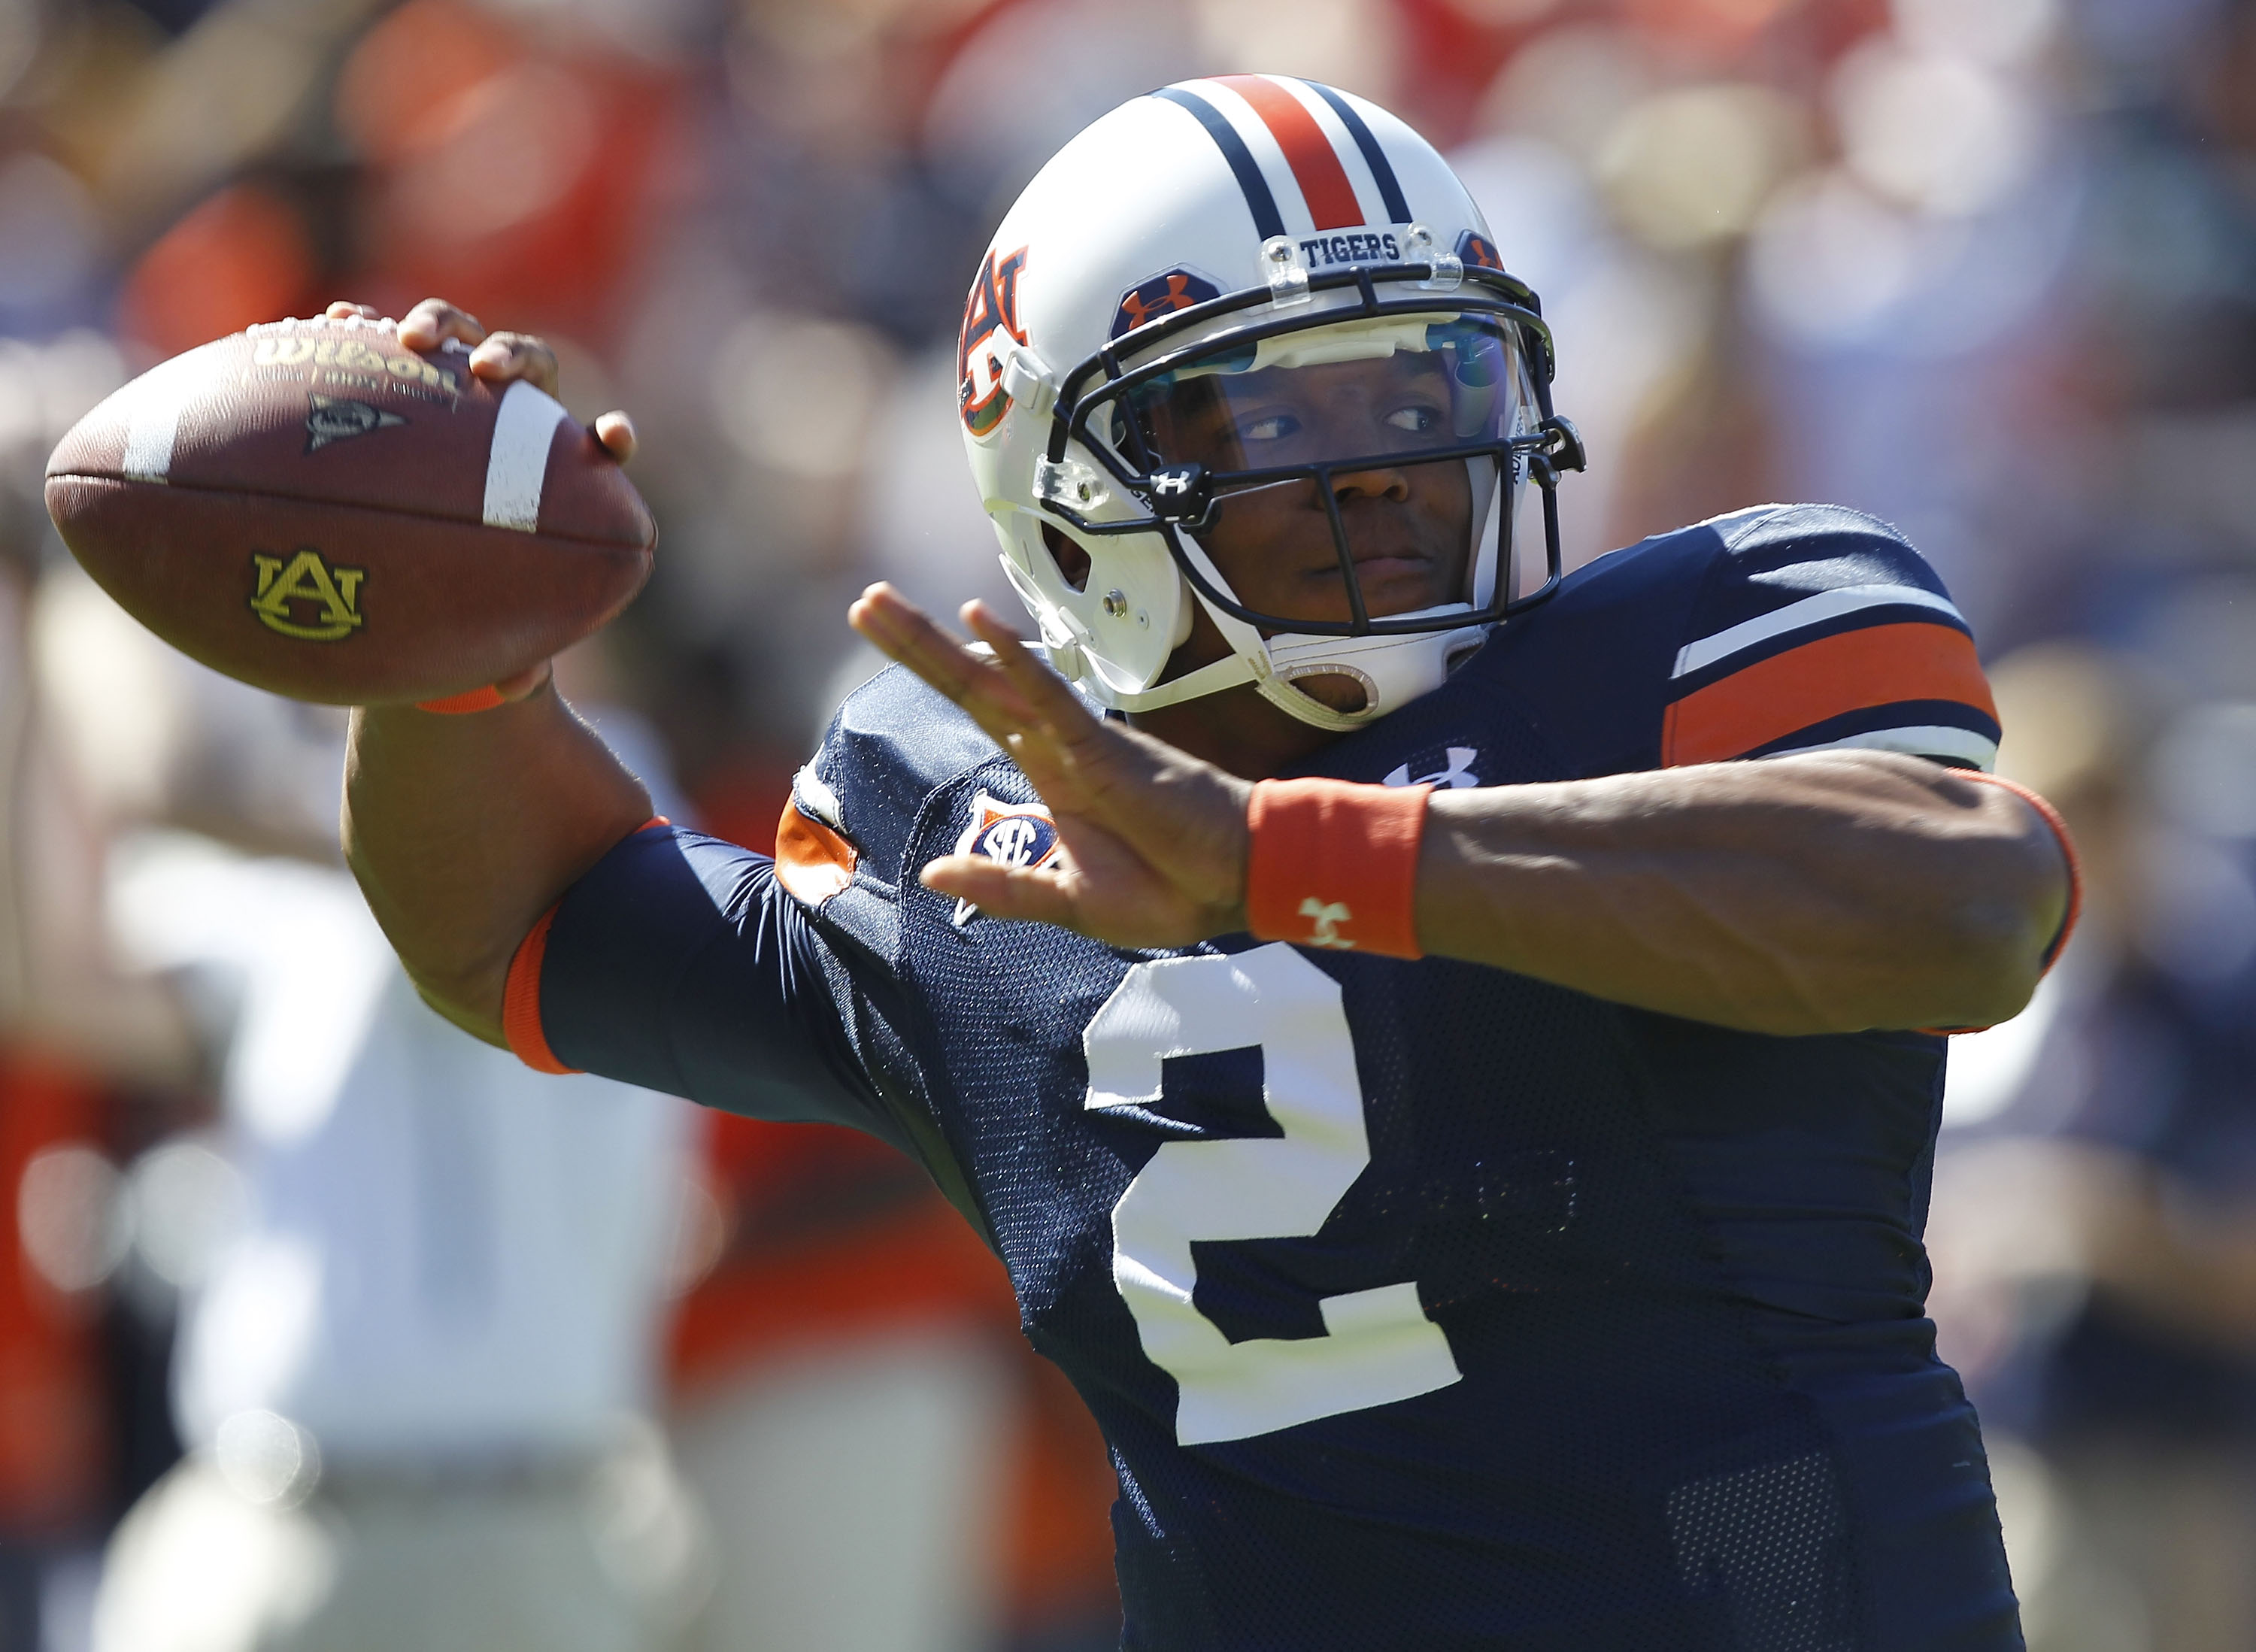 AUBURN, AL - OCTOBER 16:  Quarterback Cam Newton #2 of the Auburn Tigers throws a practice pass before the game against the Arkansas Razorbacks at Jordan-Hare Stadium on October 16, 2010 in Auburn, Alabama.  (Photo by Mike Zarrilli/Getty Images)